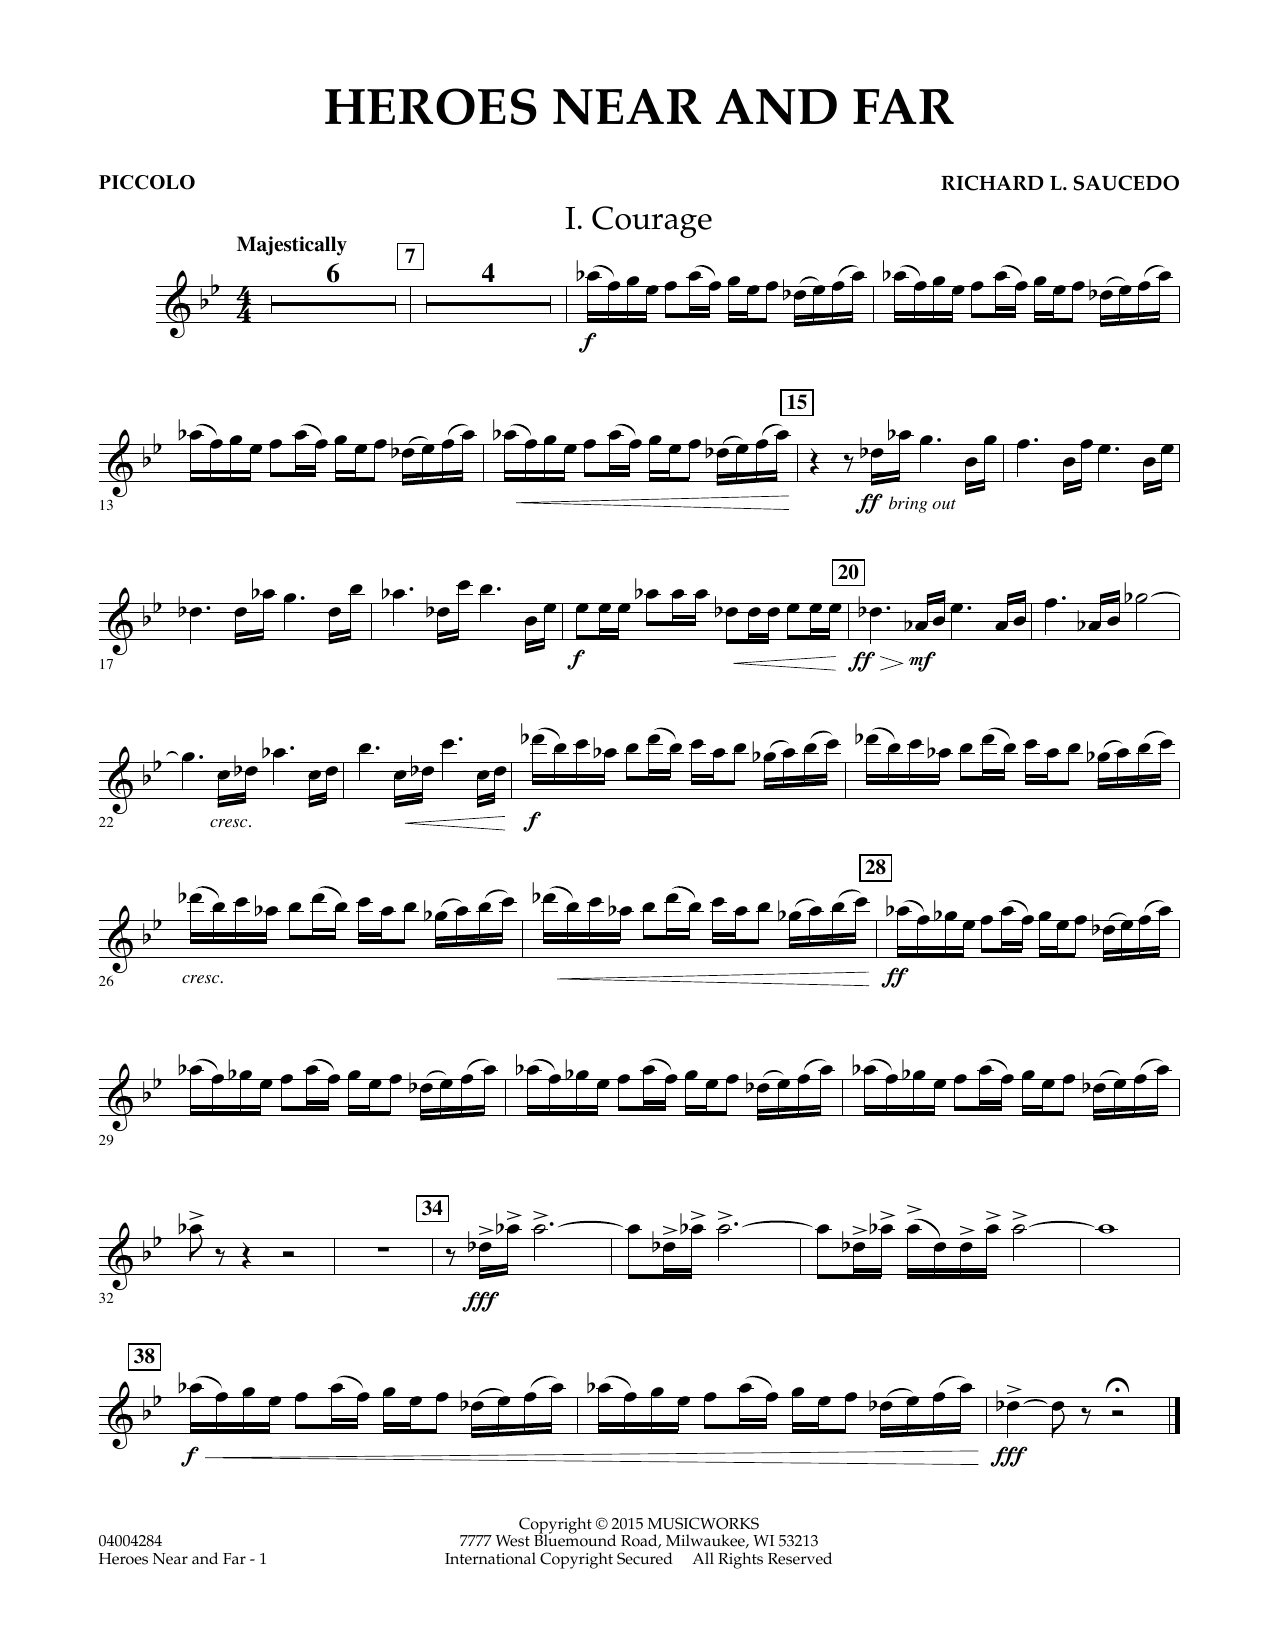 Richard L. Saucedo Heroes Near and Far - Piccolo sheet music notes and chords. Download Printable PDF.